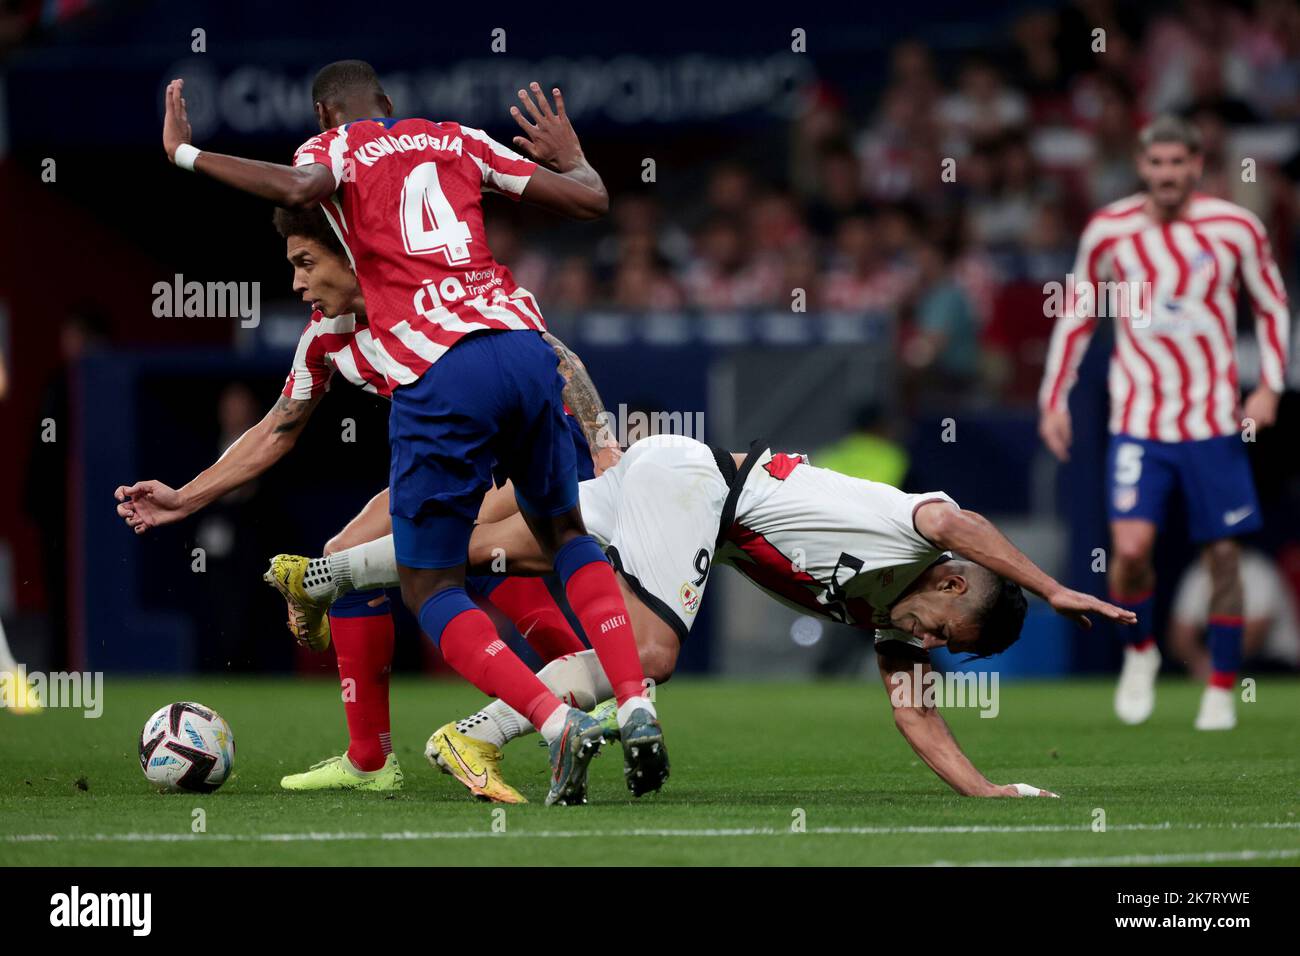 Madrid, Spanien. 18th Oct, 2022. Madrid Spain; 18.10.2022.- Atletico de Madrid players Kondogbia (L) and Witsel (R) crash with Rayo Vallecano player Radamel Falcao. Atlético de Madrid vs Rayo Vallecano Football match between Madrid teams from the Spanish League on matchday 10 held at Civitas Metropolitano Stadium to capital of the Kingdom of Spain and ended in a tie at 1. Atletico Madrid goal by Morata 20  Rayo Vallecano goal by Radamel Falcao 90 2' penalty Credit: Juan Carlos Rojas/dpa/Alamy Live News Stock Photo